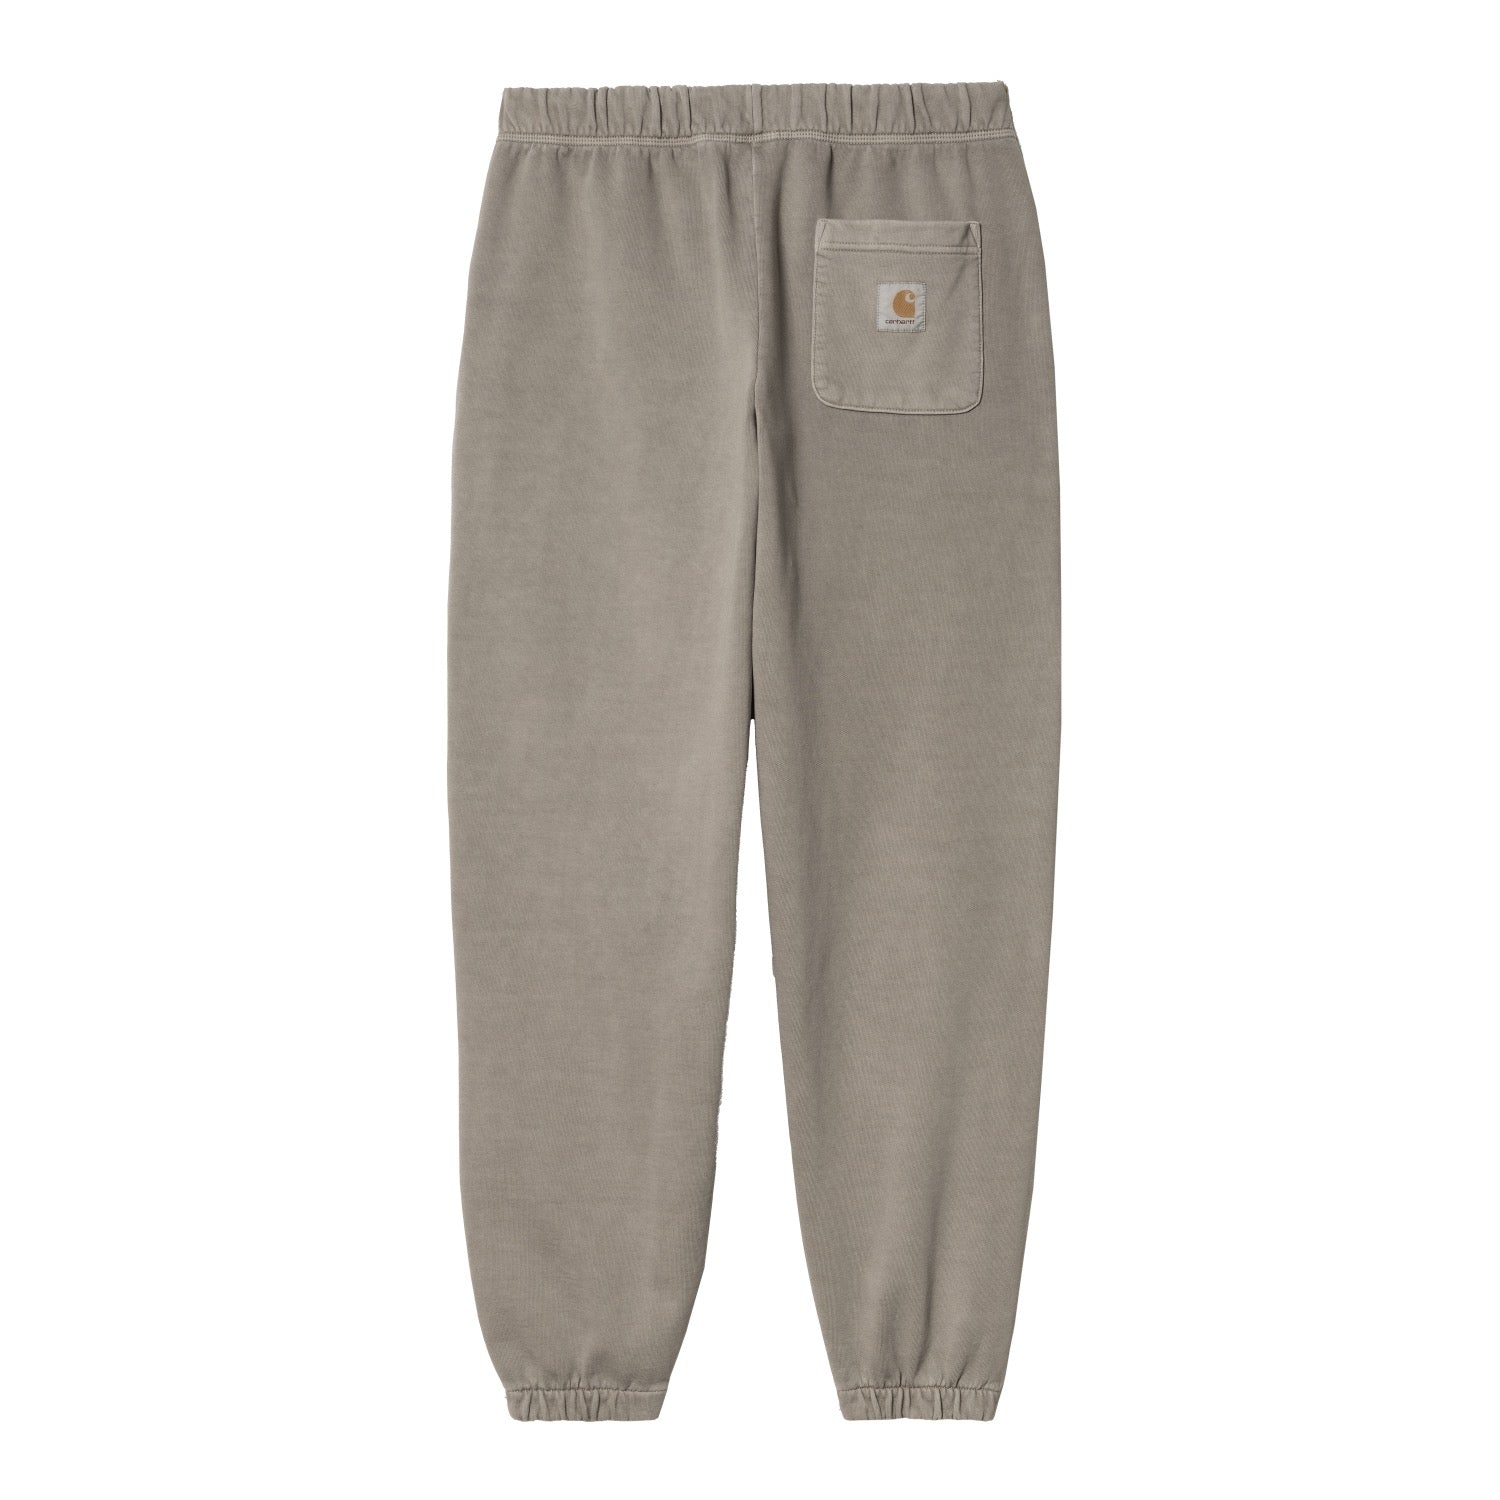 CLASS OF 89 SWEAT PANT - Marengo / White (garment dyed)